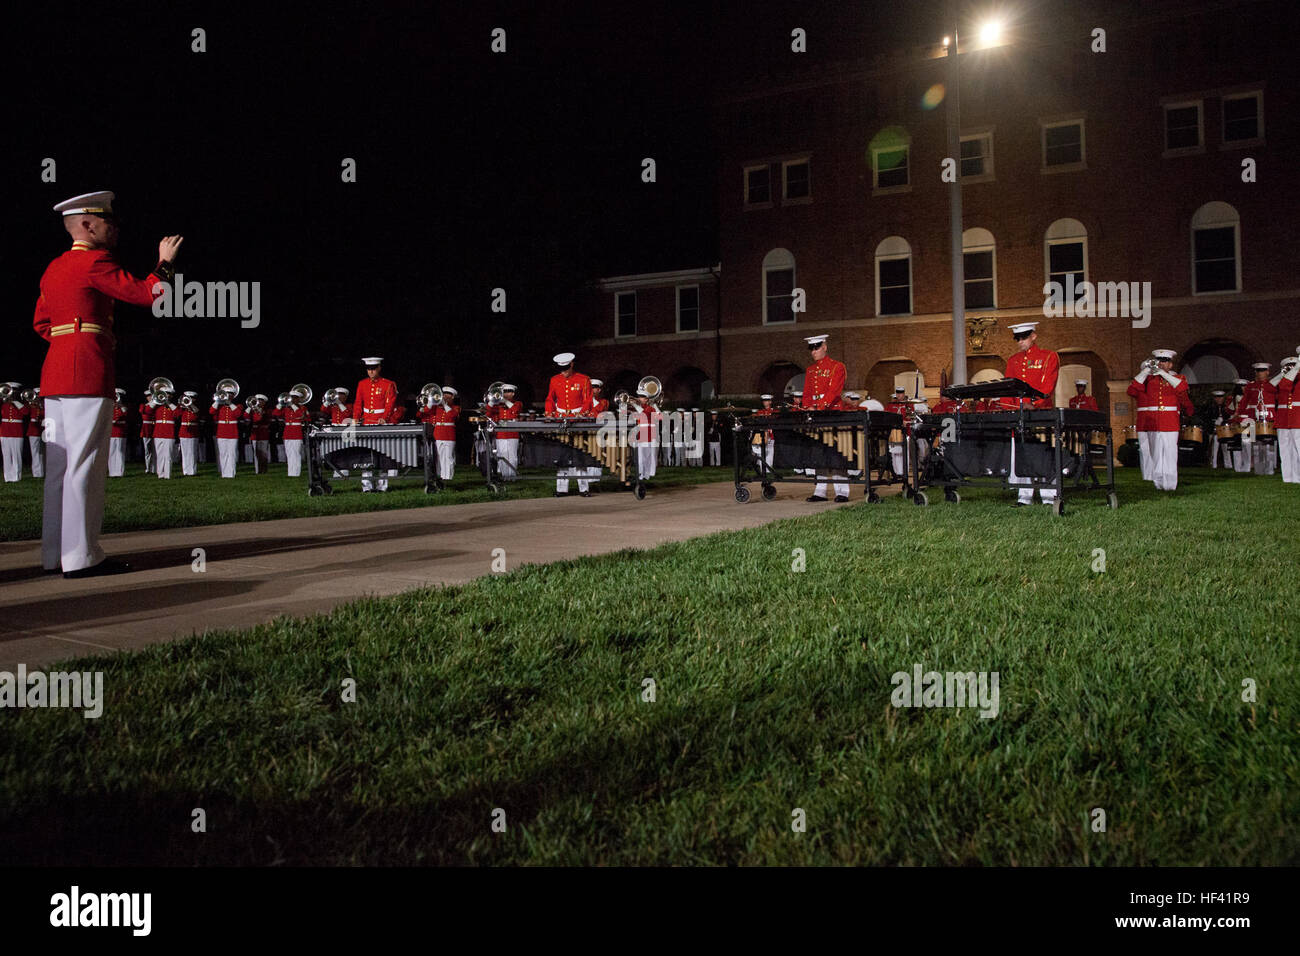 U.S. Marines with Marine Barracks Washington (MBW) performs during an evening parade in MBW, D.C., June 10, 2016. The evening parade summer tradition began in 1934 and features the Silent Drill Platoon, the U.S. Marine Band, the U.S. Marine Drum and Bugle Corps and two marching companies. More than 3,500 guests attend the parade every week. (U.S. Marine Corps photo by Lance Cpl. Kayla. V. Staten/ Released) June 10 Evening Parade 061016-M-DG059-188 Stock Photo